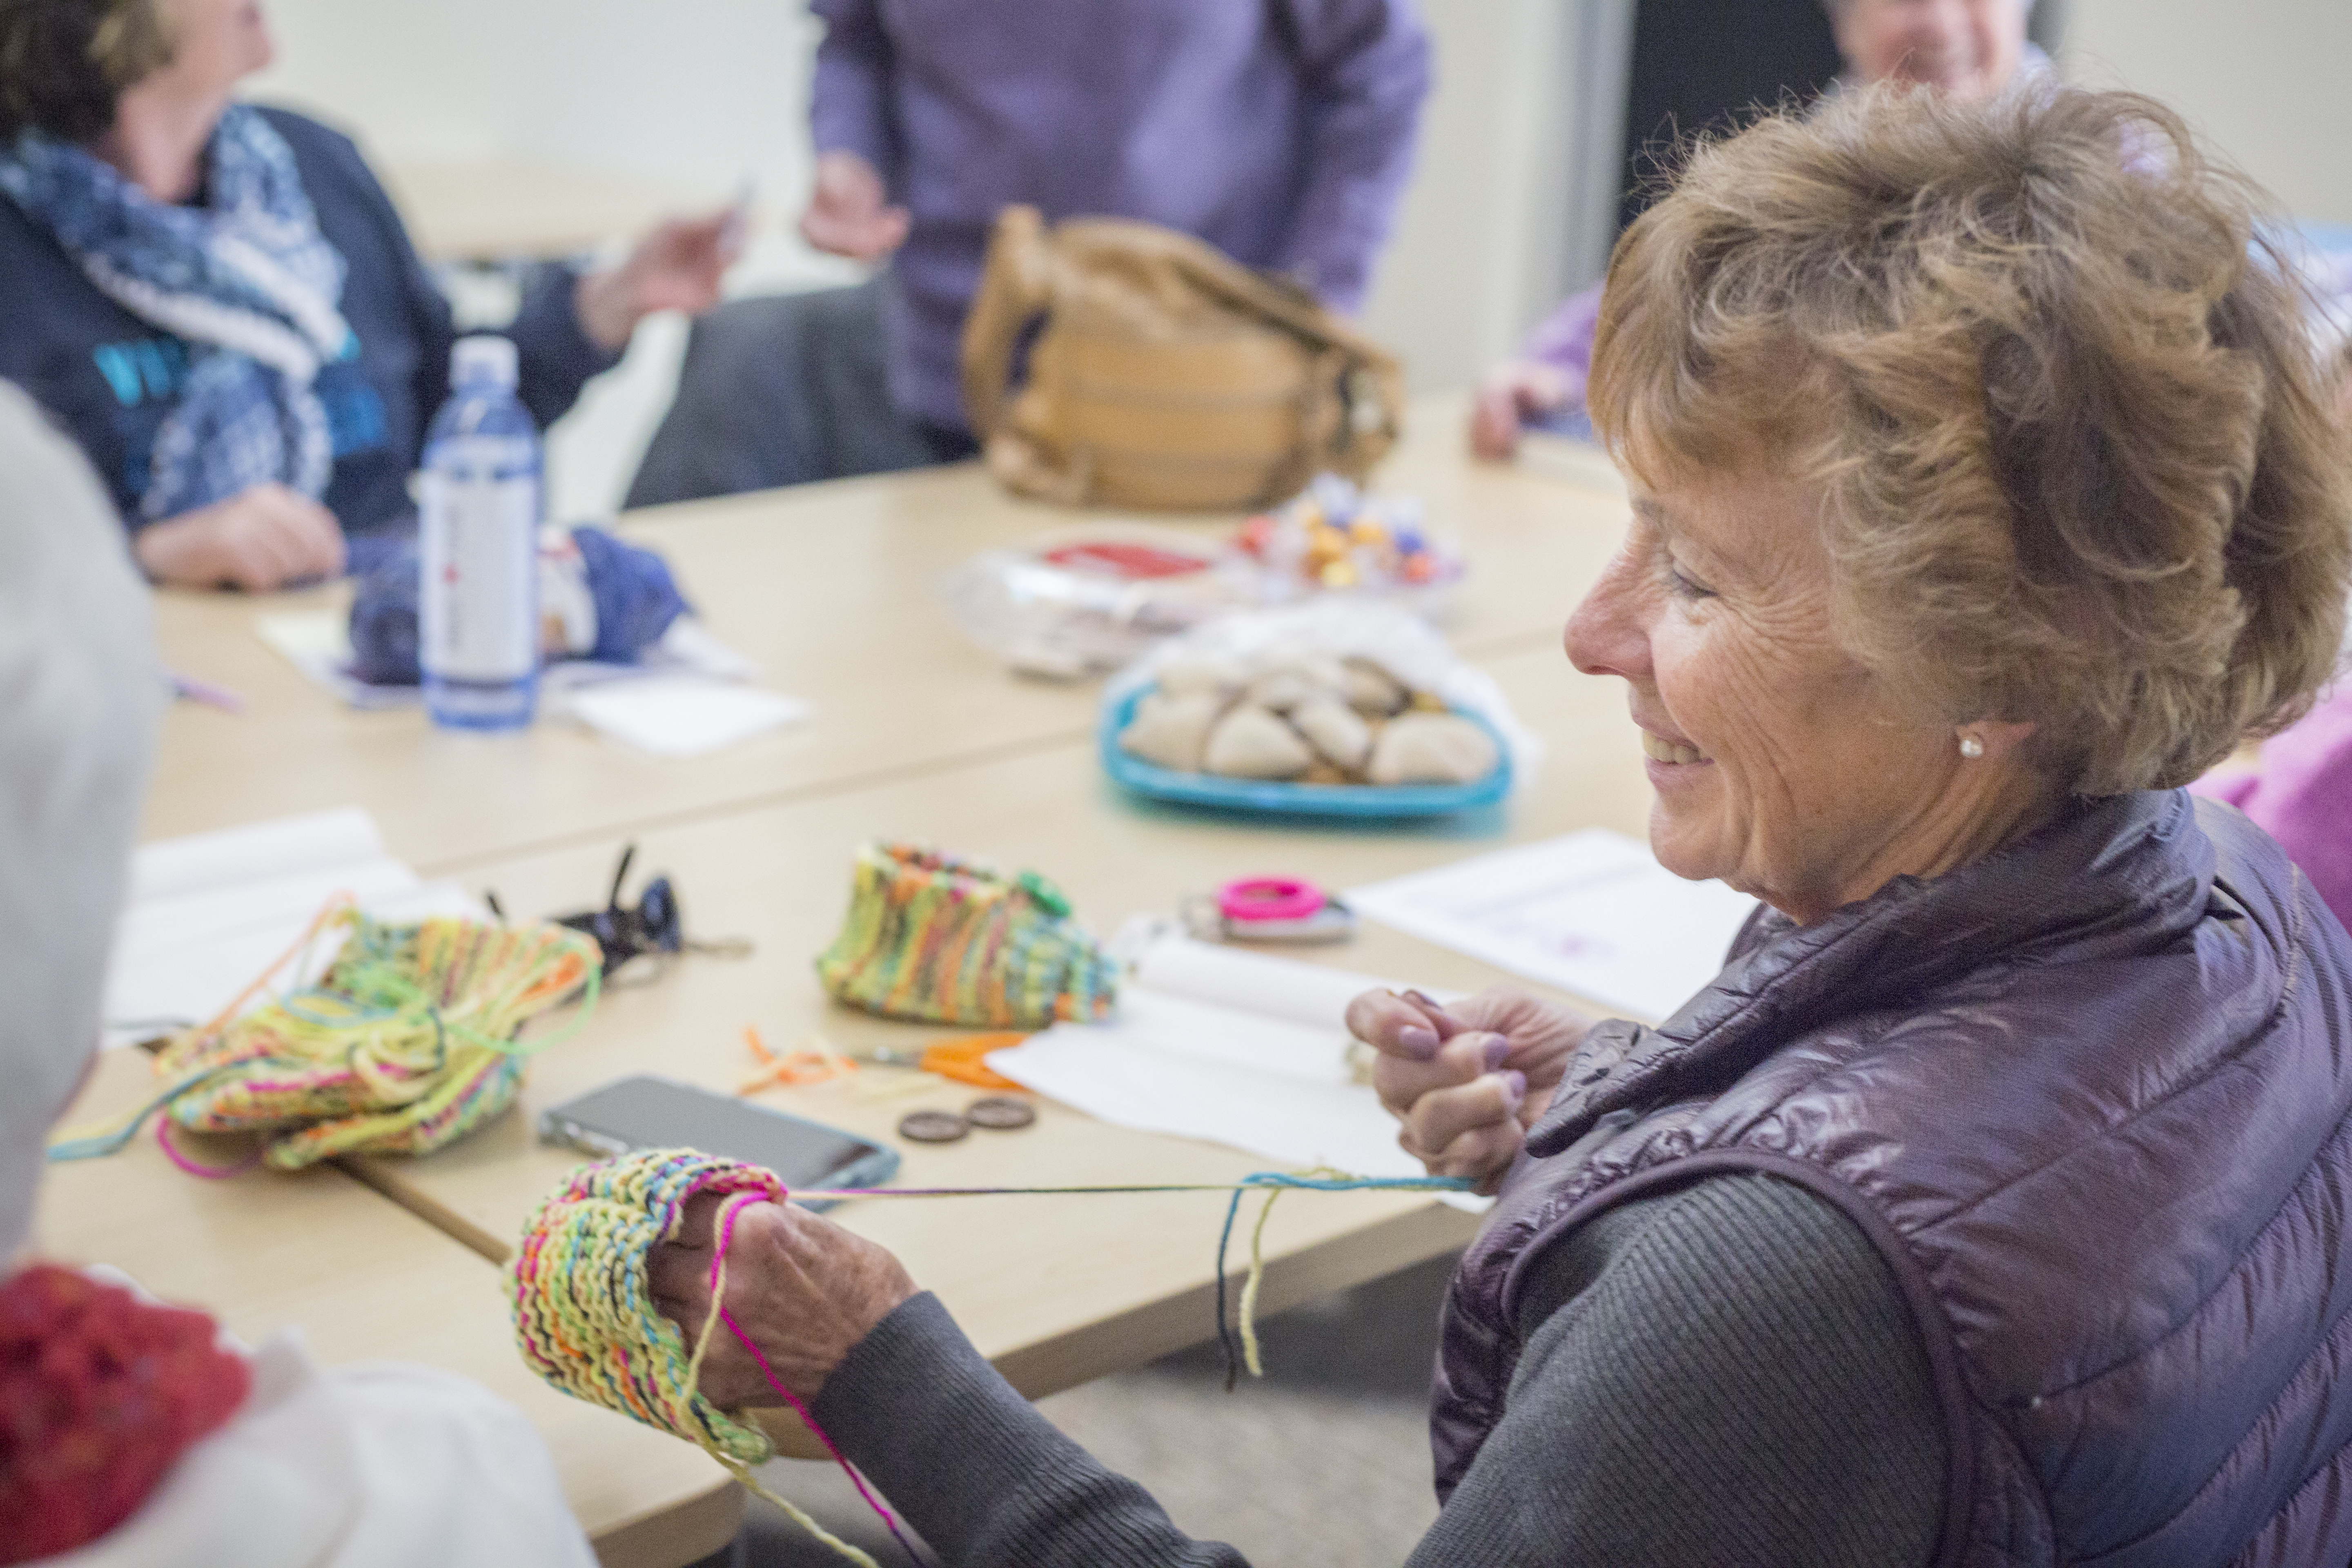 A woman smiles amongst a group of adults engaging in a social activity involving yarn.